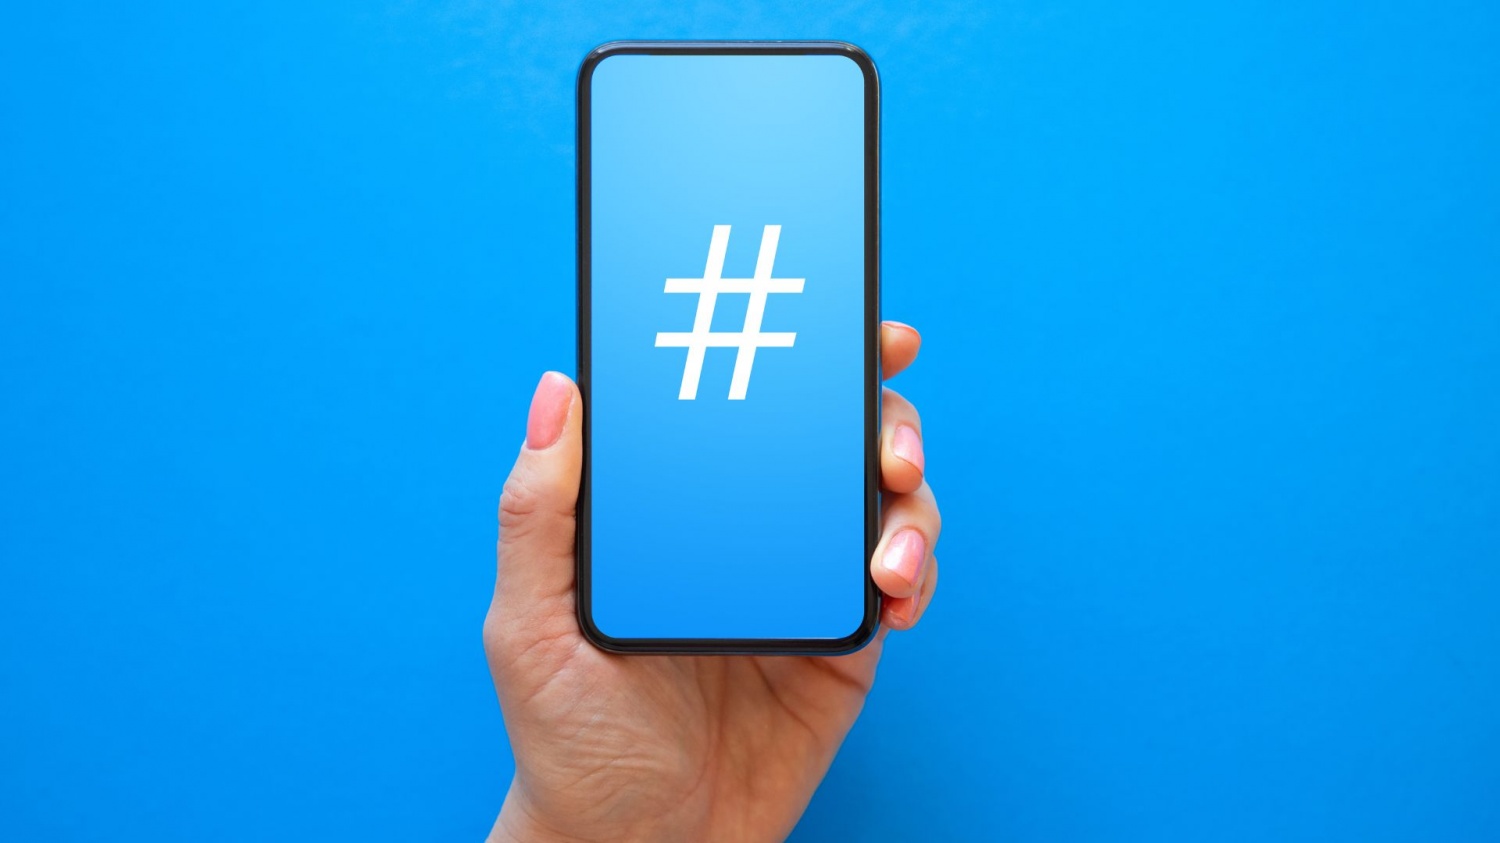 Twitter to End Free API Access, Introduces Paid Basic Tier Starting February 9